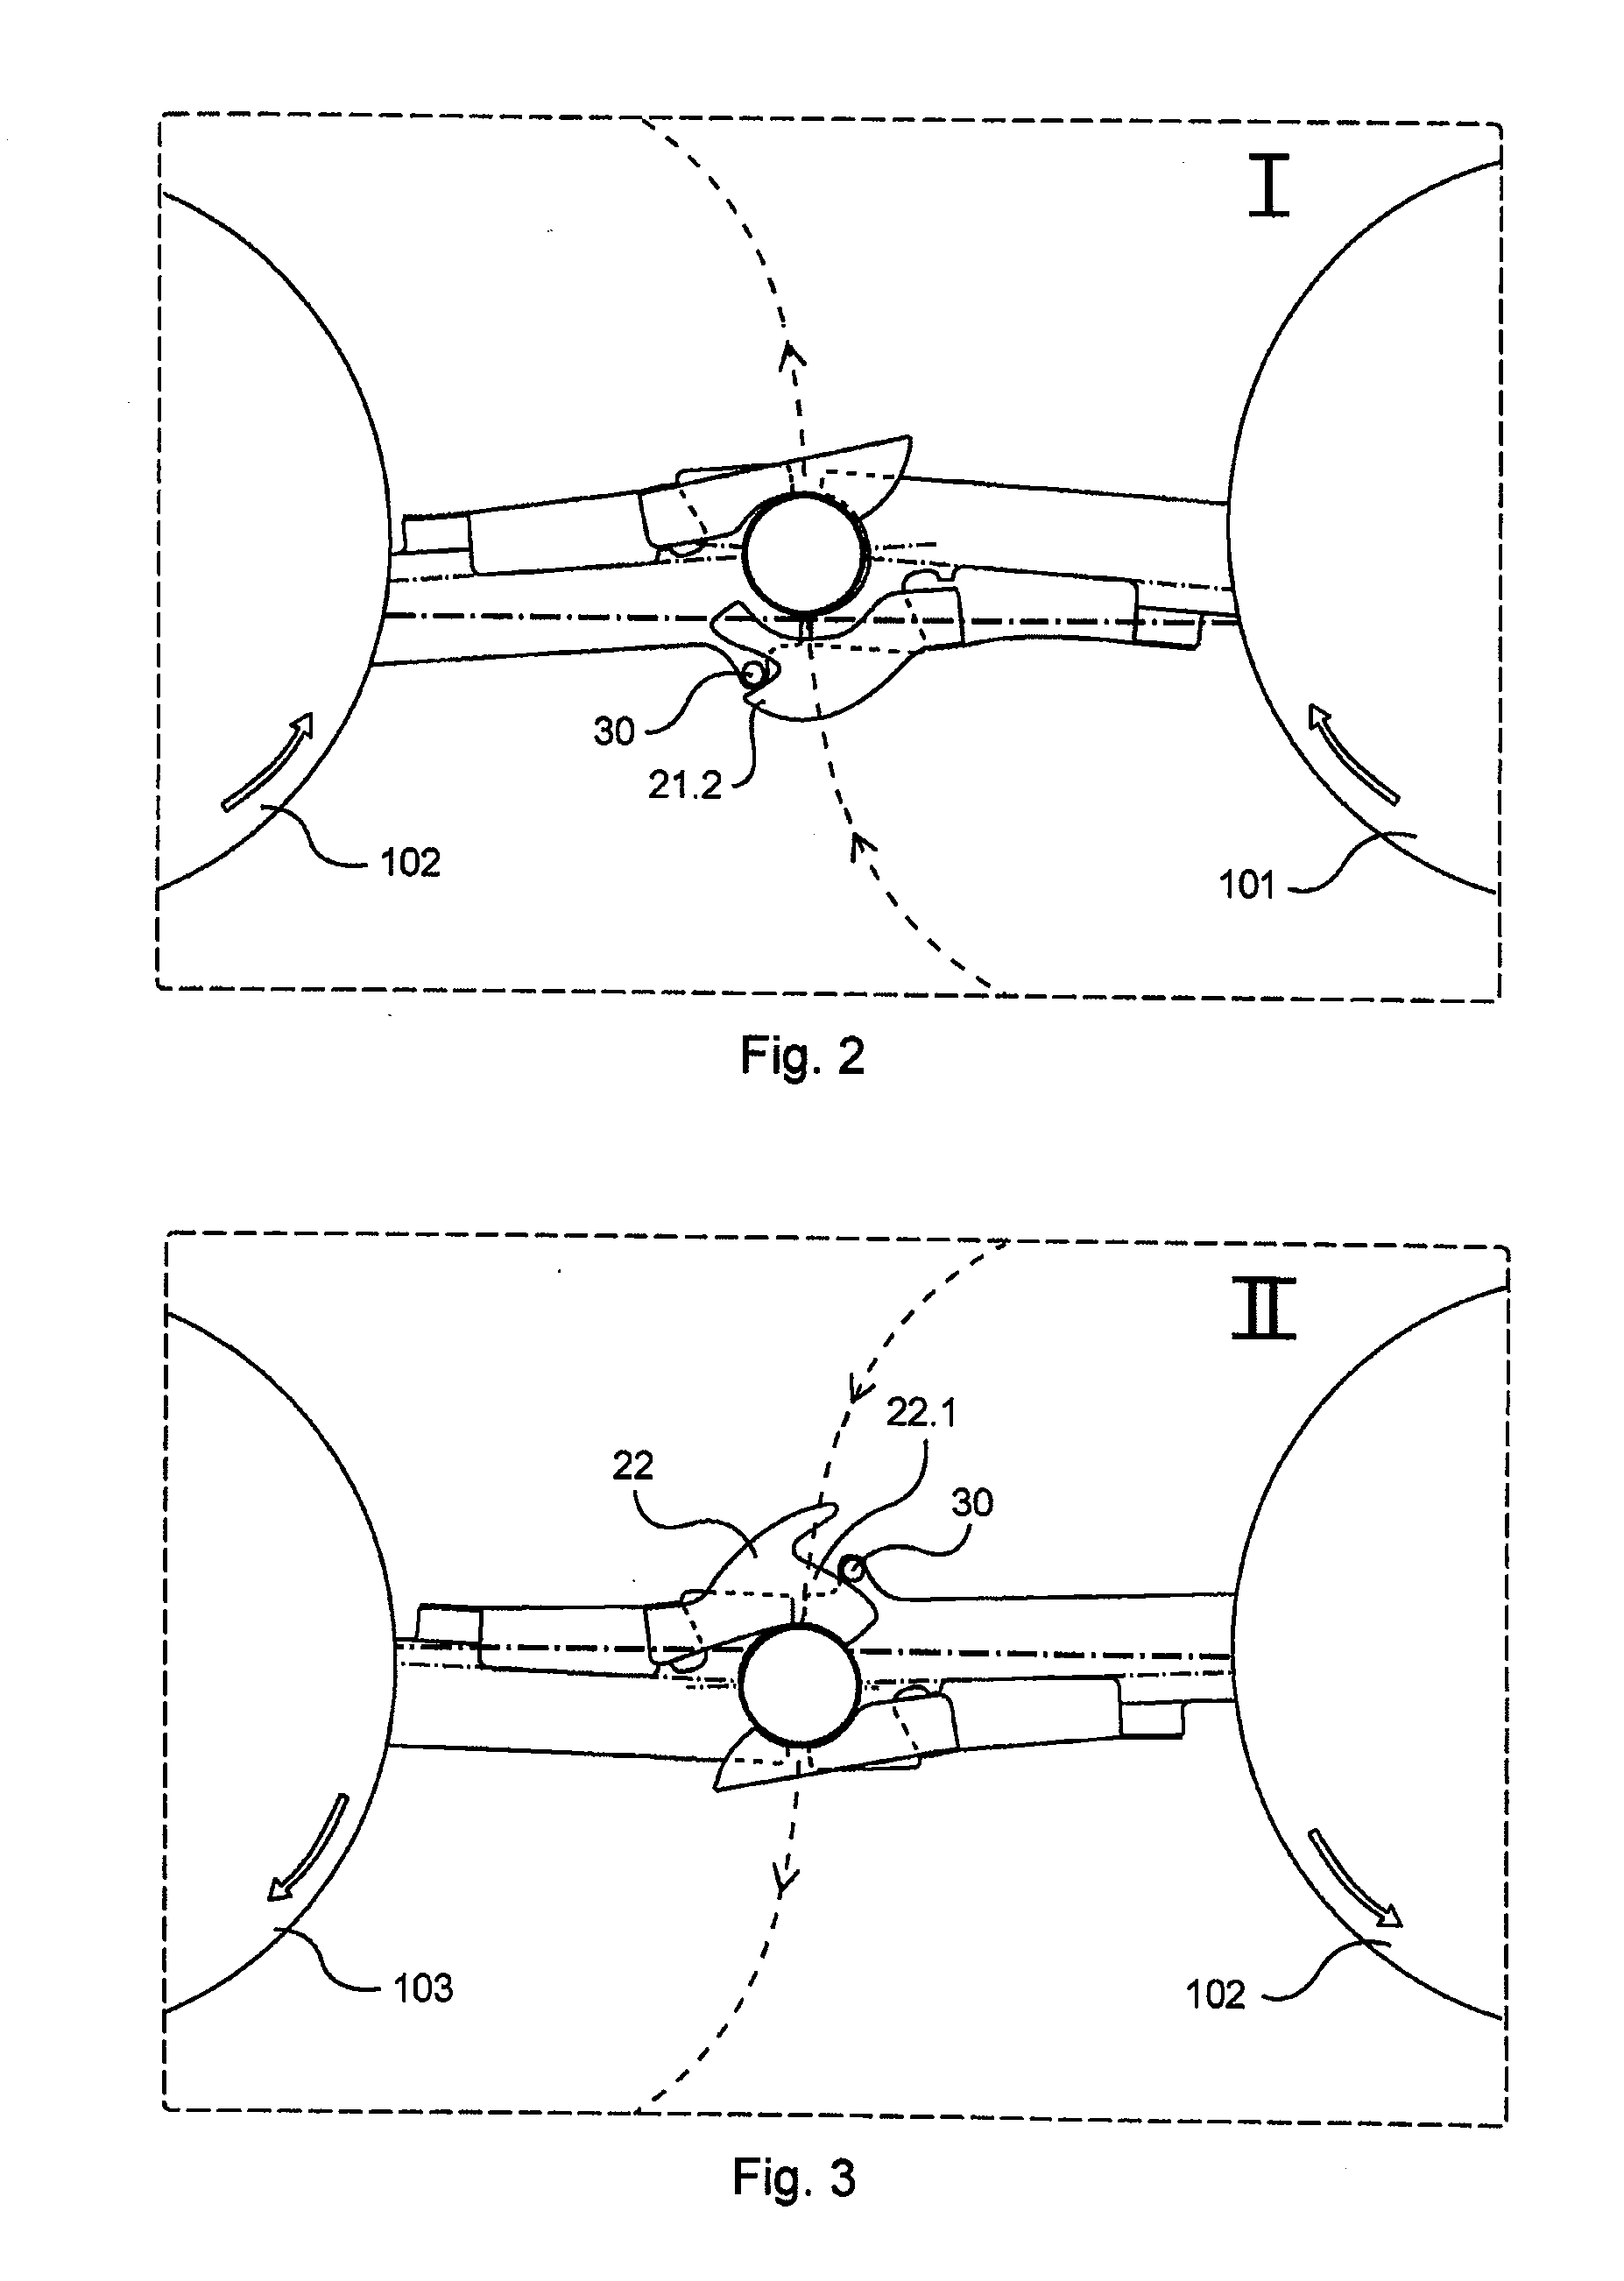 Container-Treatment Installation Having Holder Devices Configured to Co-Operate Mutually